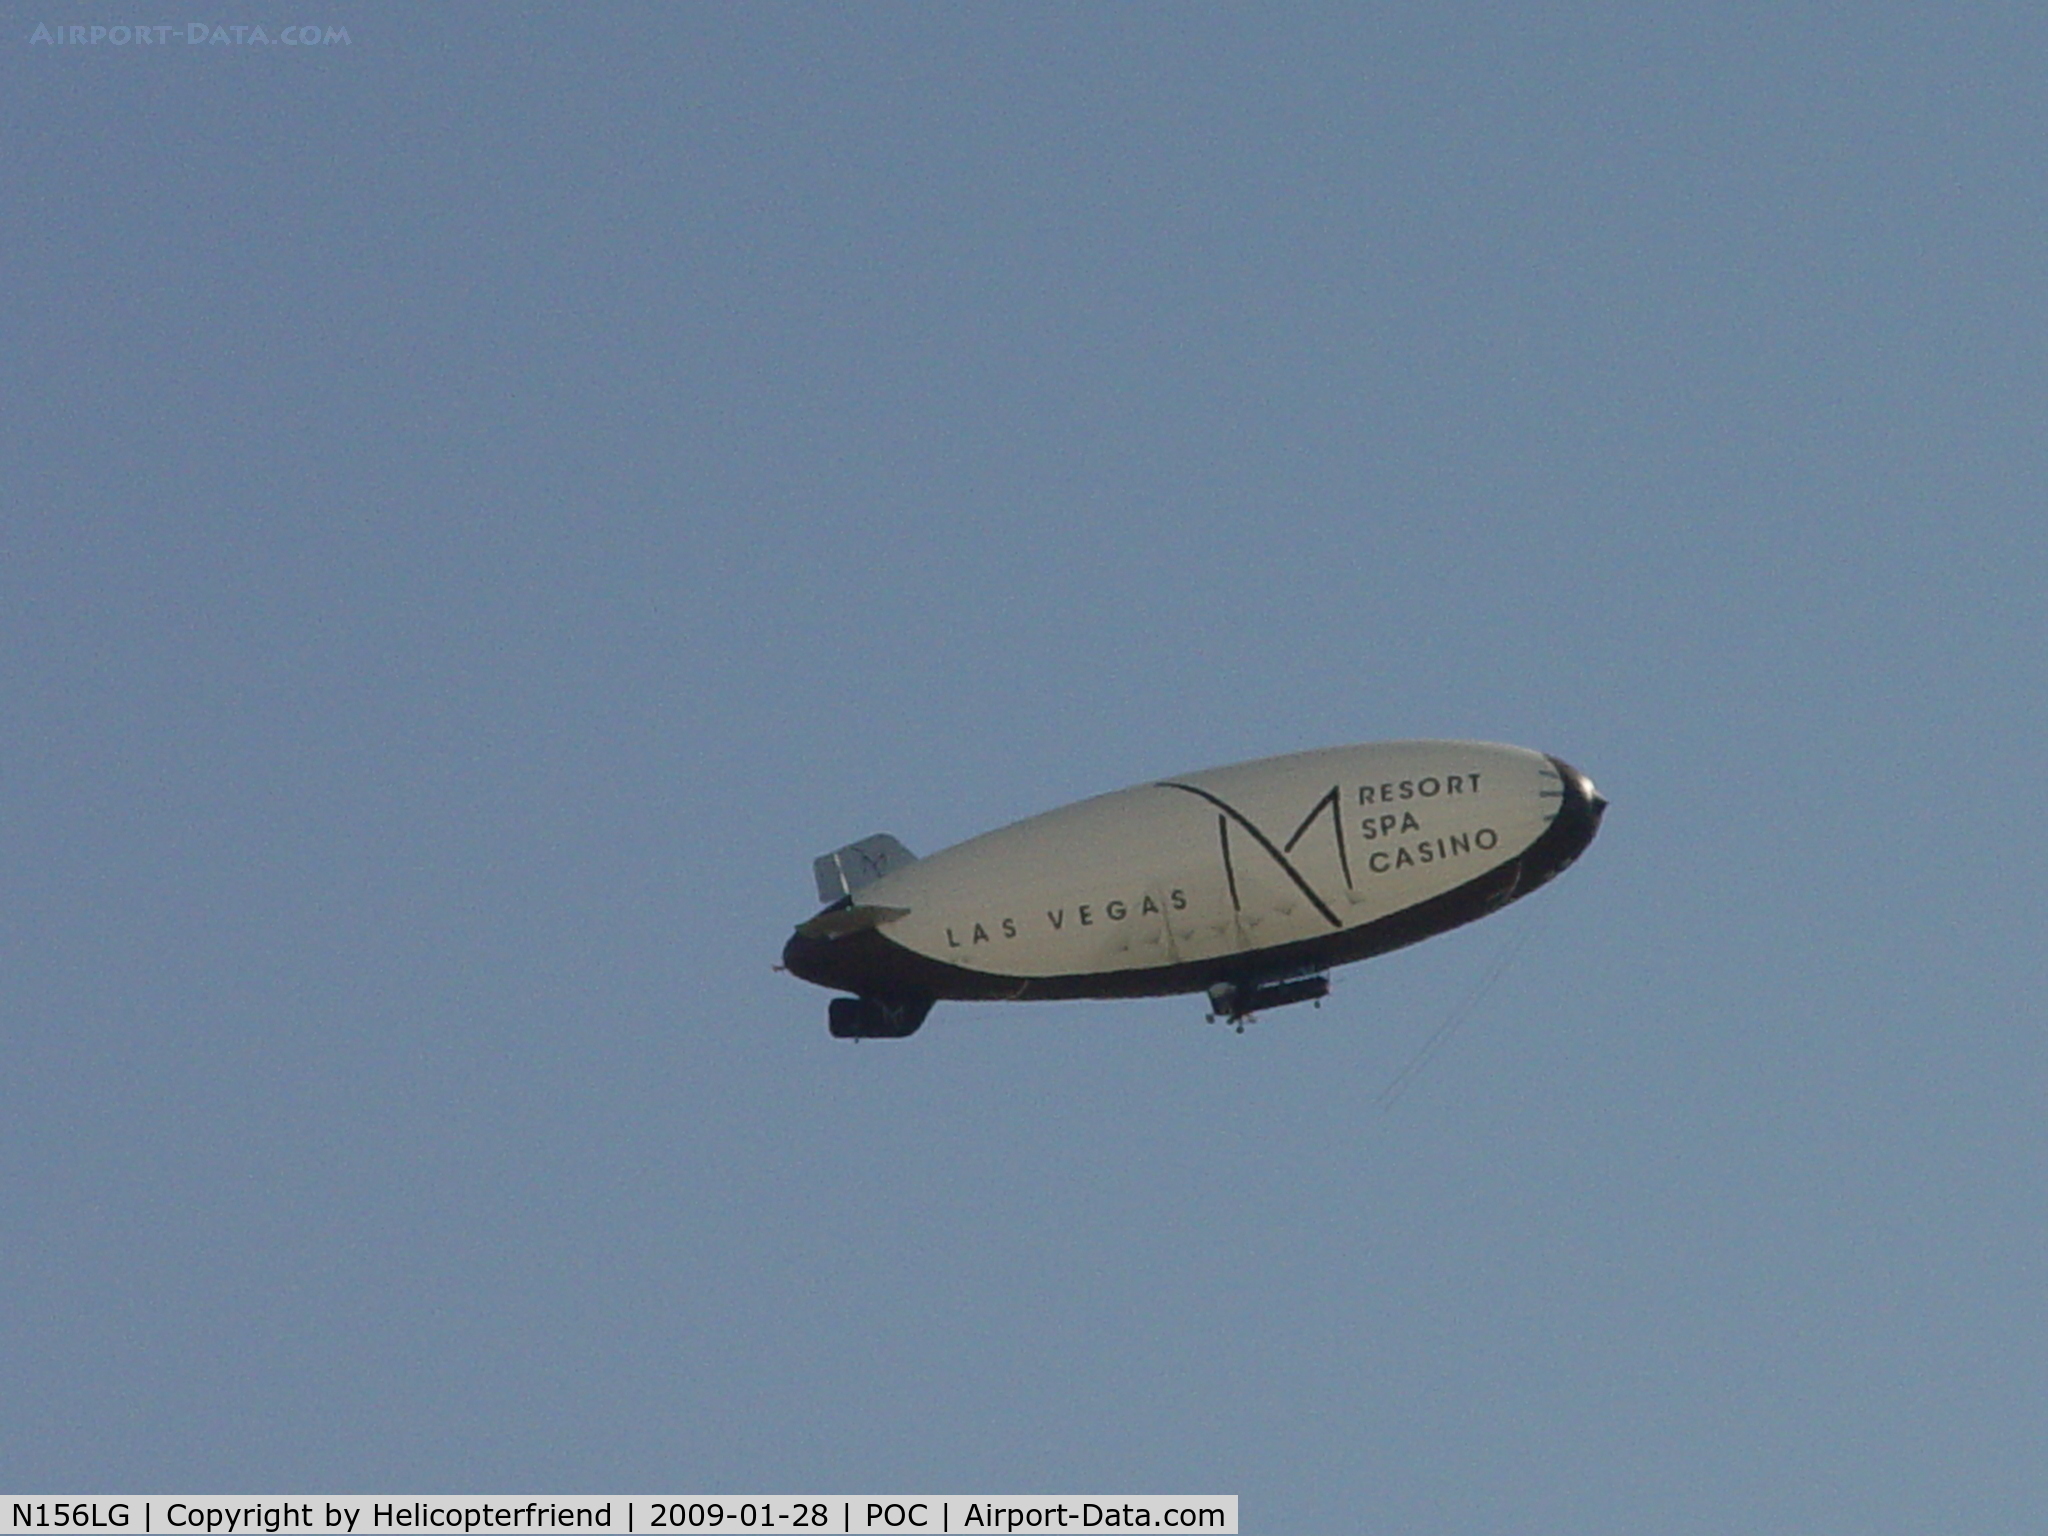 N156LG, 2000 American Blimp Corp A-1-70 C/N 106, Westbound advertising and following freeway IS 10